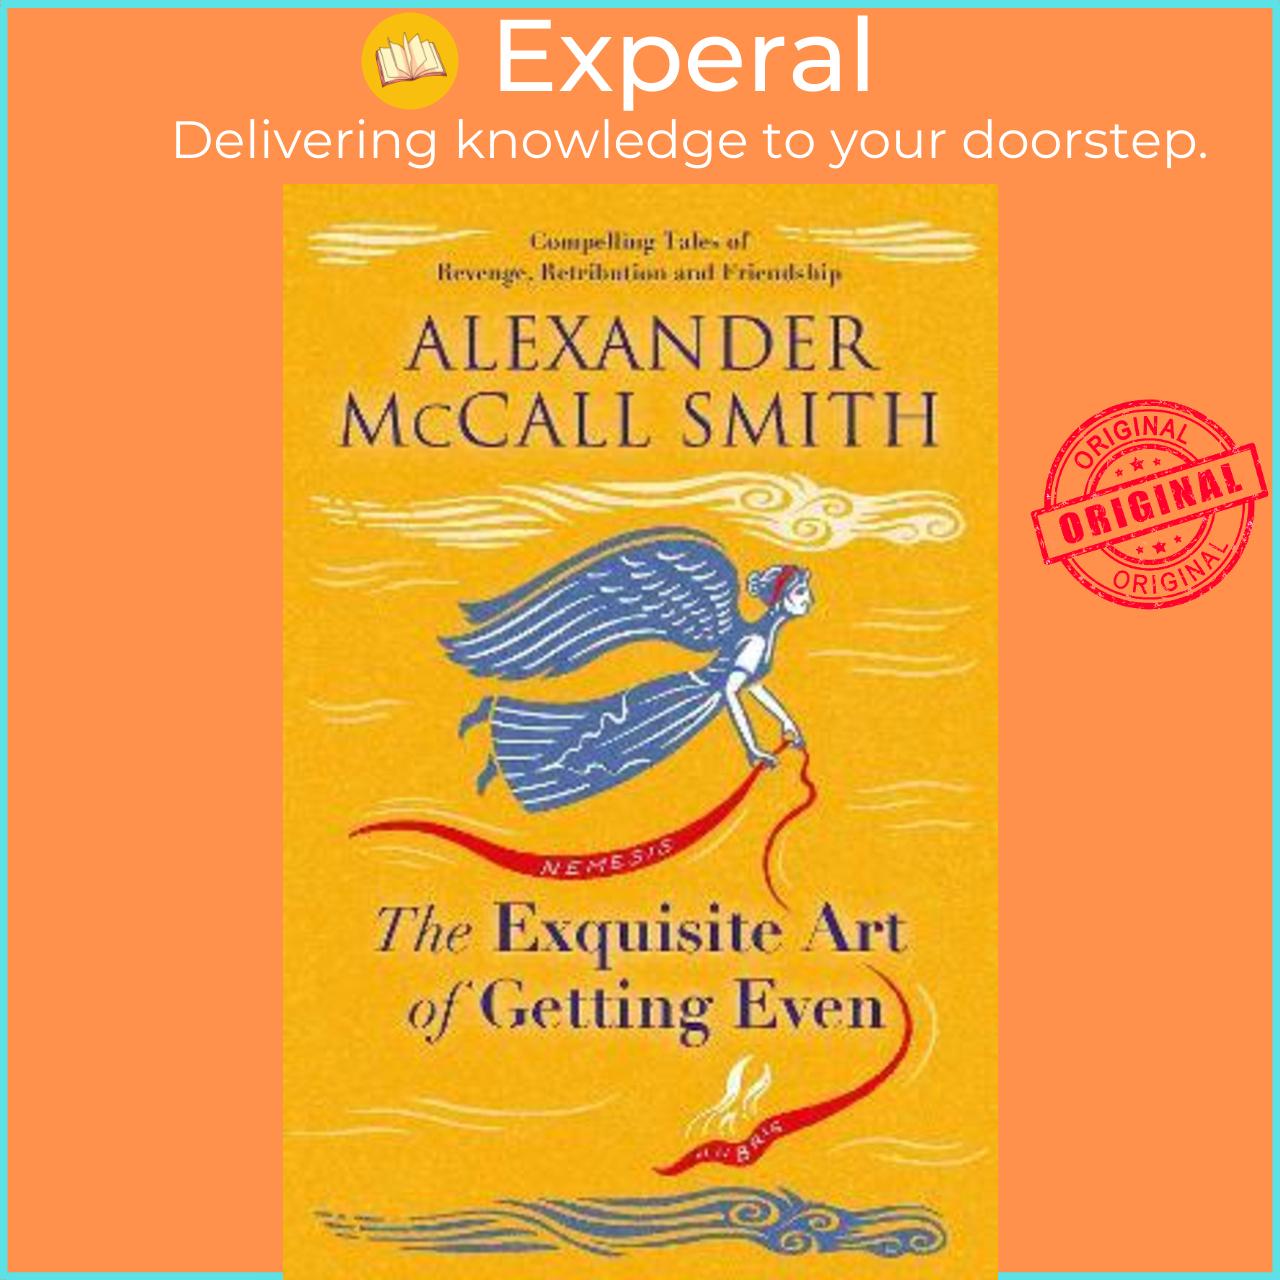 Sách - The Exquisite Art of Getting Even by Alexander McCall Smith (UK edition, paperback)